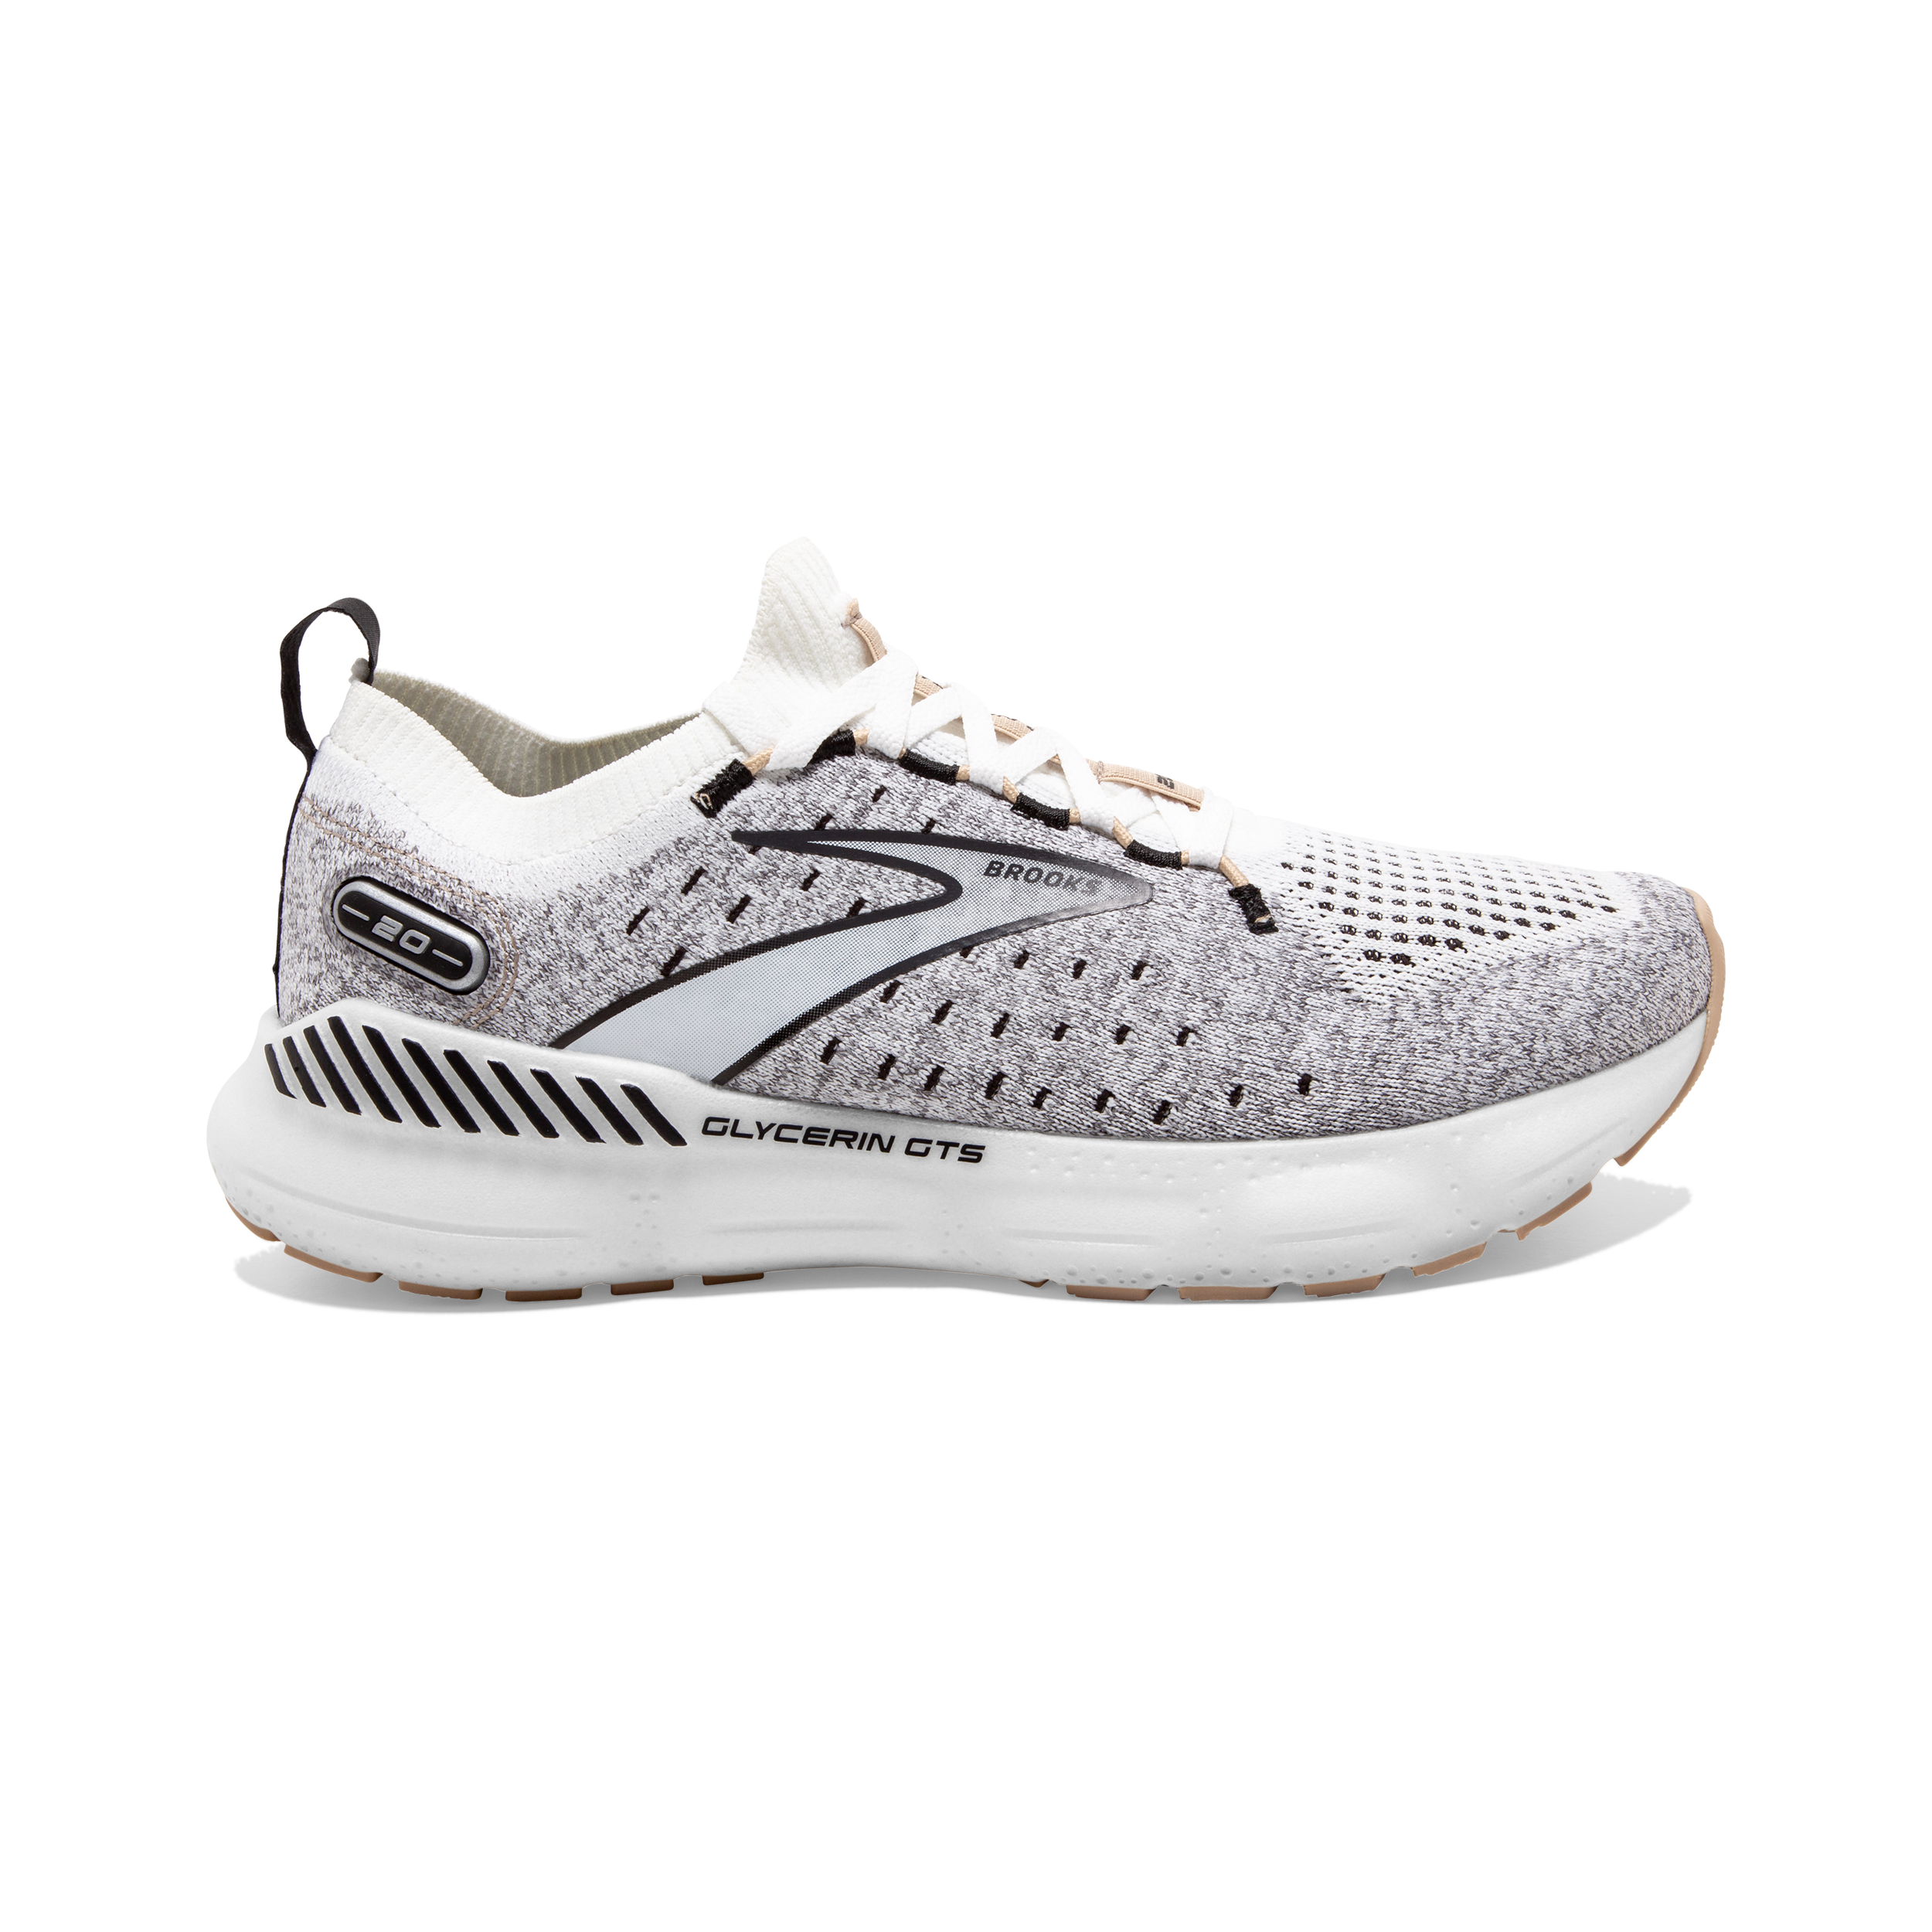 Buy Running Shoes for Women  GLYCERIN GTS 20 - Brooks Running India